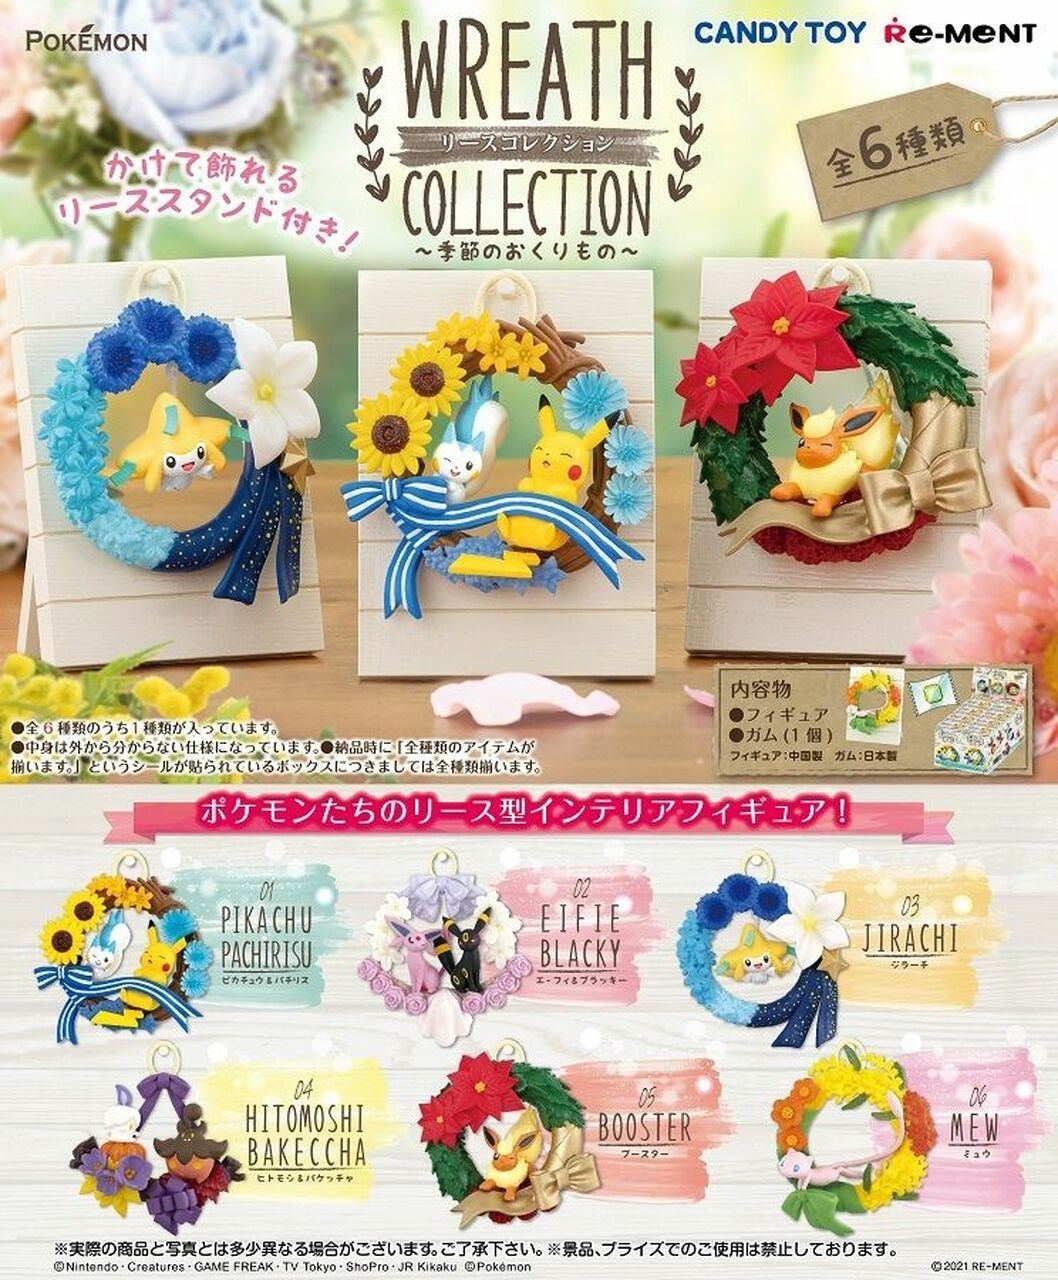 Pokemon Wreath Collection Seasonal Gift (Set of 6 Pieces) Re-ment